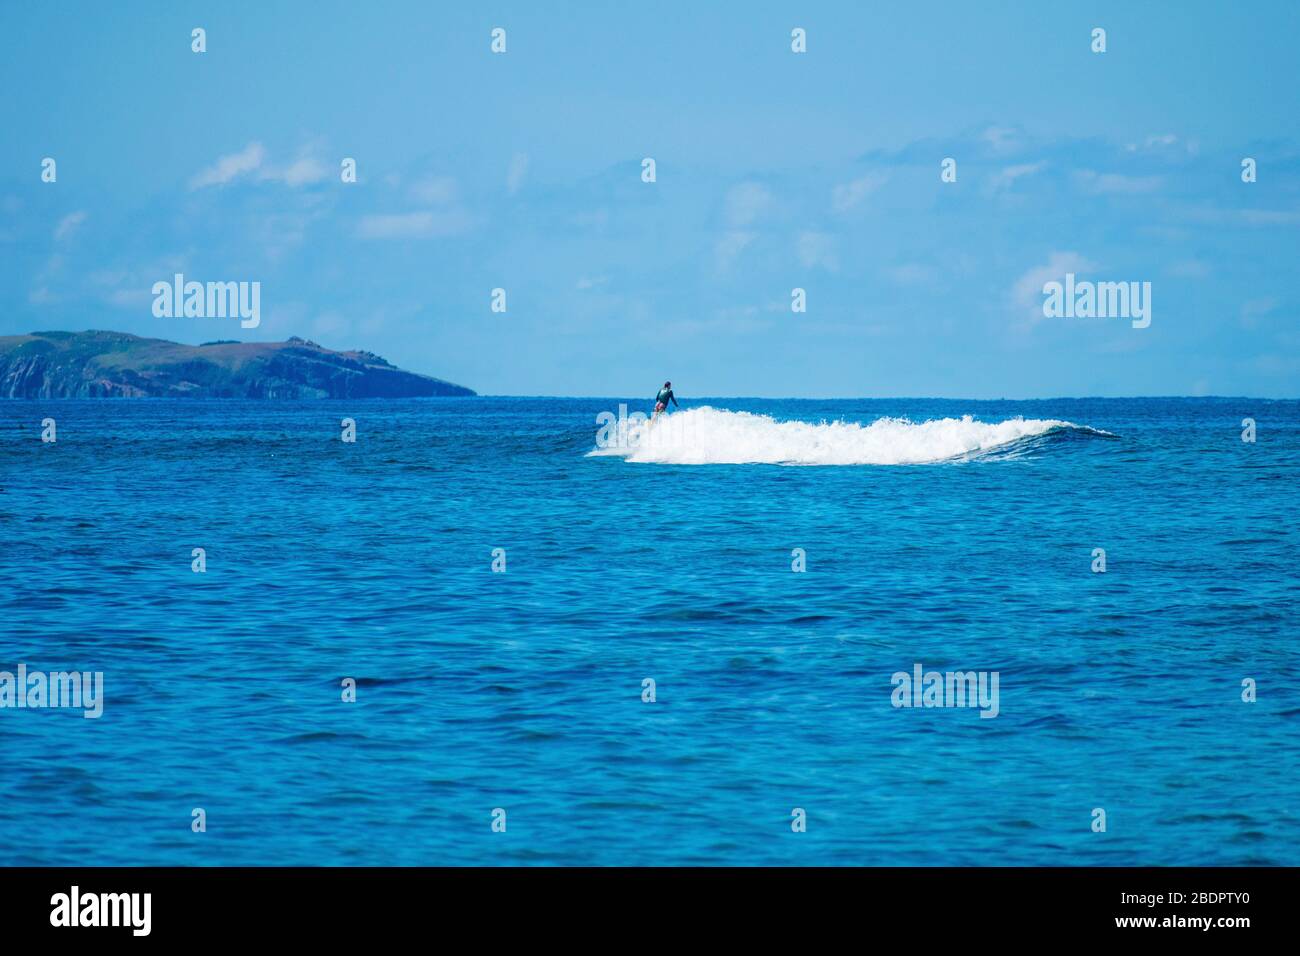 S Thomas United States Virgin Islands, Royalty free Ocean sports background, Caribbean beach vacation, Surfboarding, Surfer, Tranquil Ocean Landscape Stock Photo